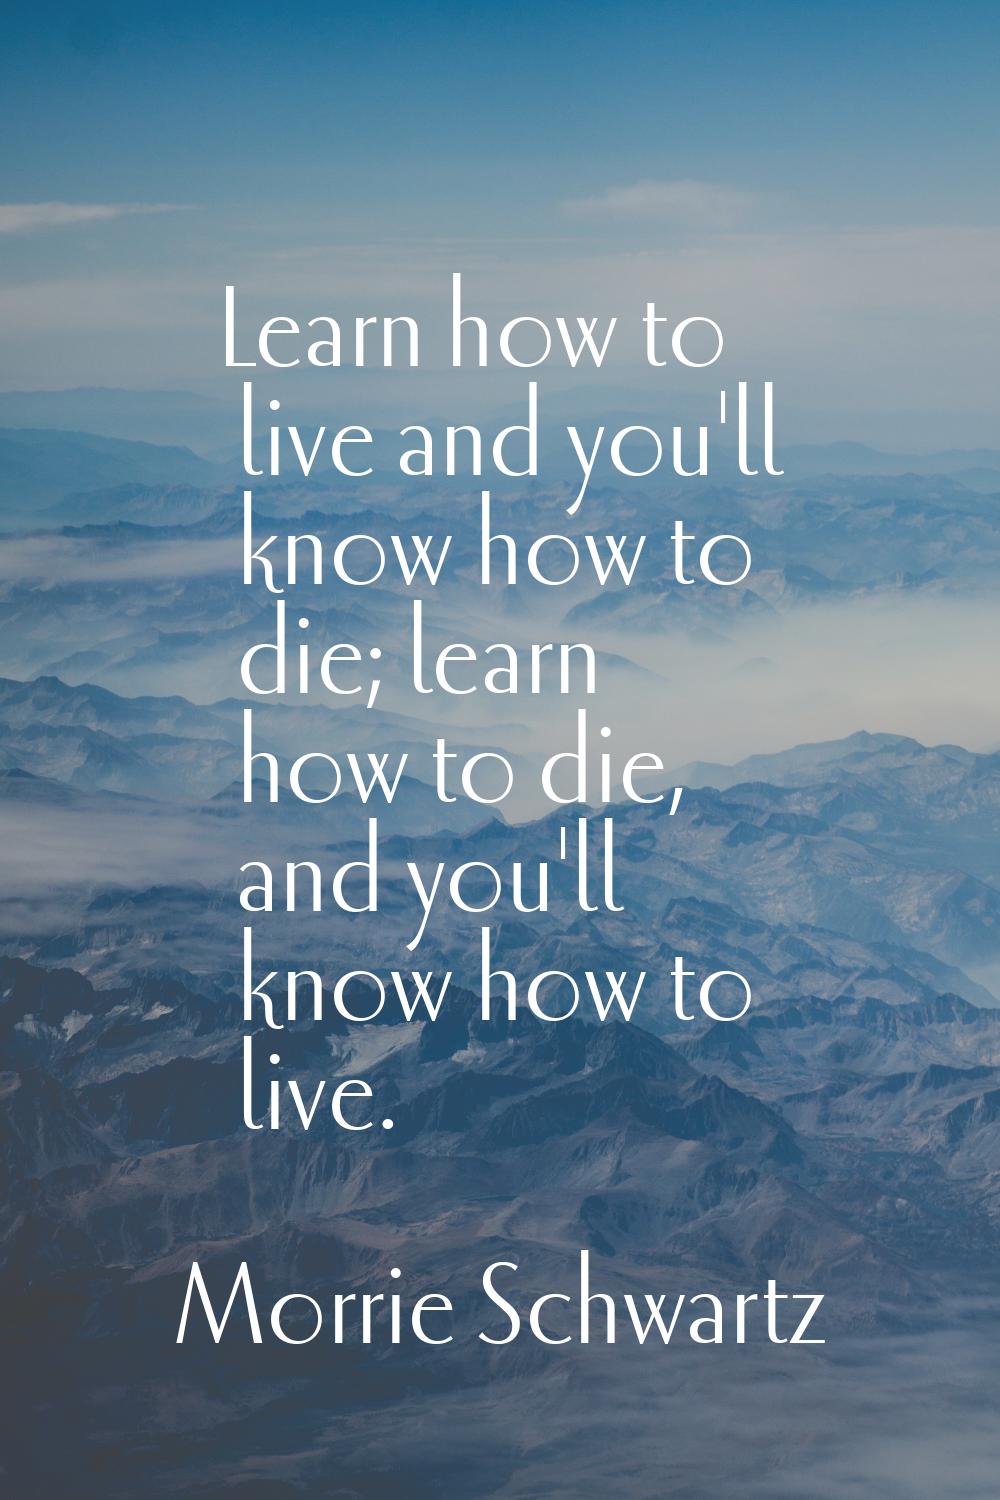 Learn how to live and you'll know how to die; learn how to die, and you'll know how to live.